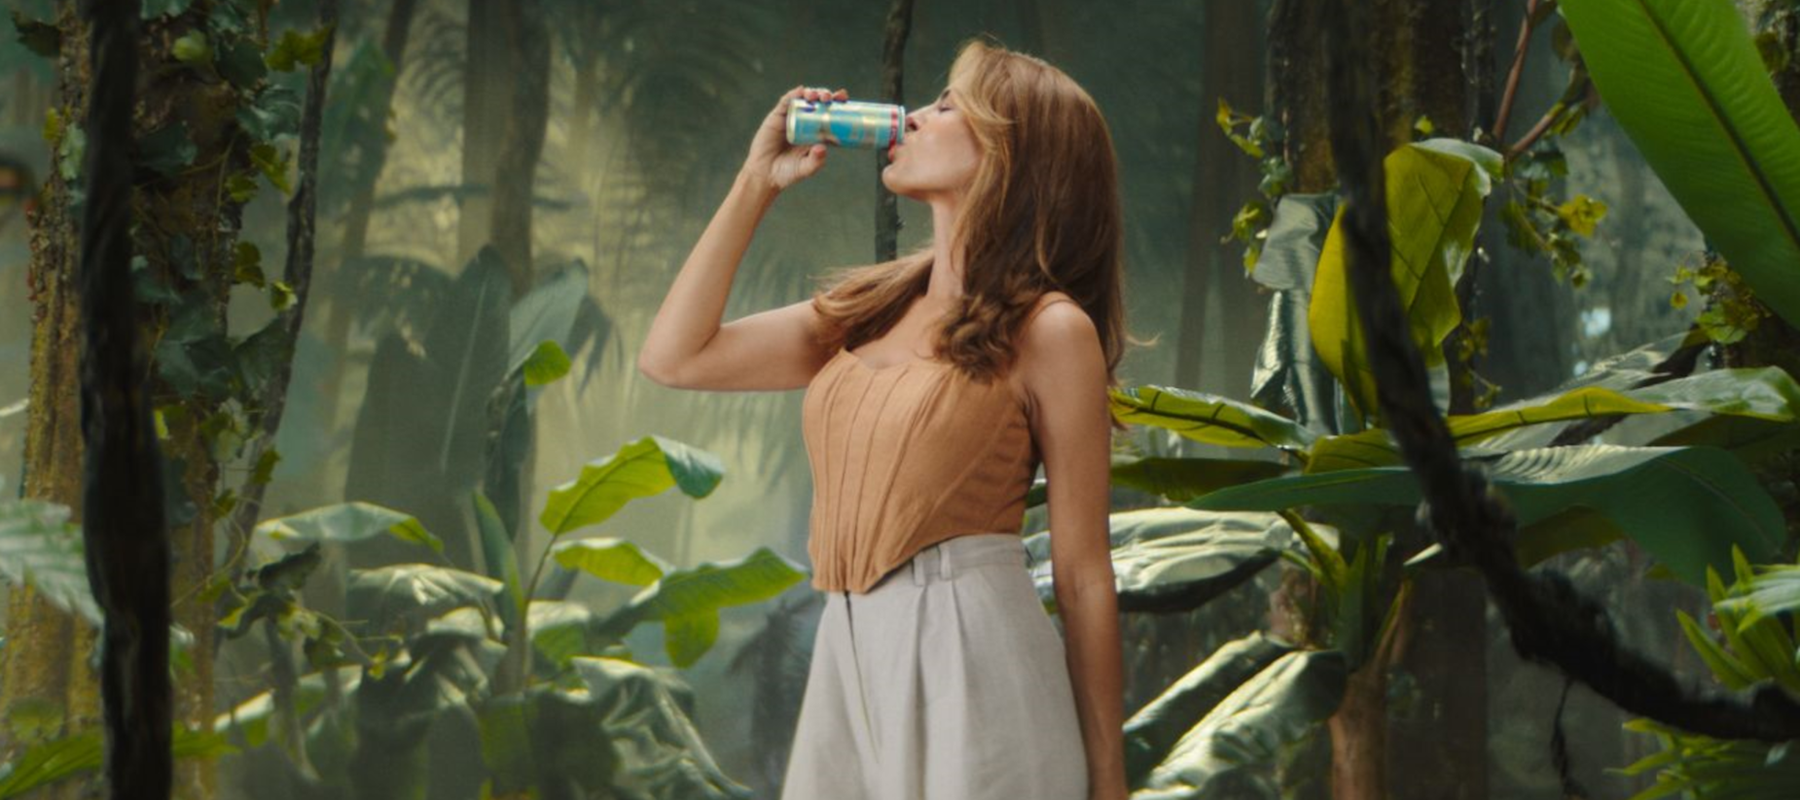 Dept teams up with American superstar Eva Mendes to launch campaign for new water brand